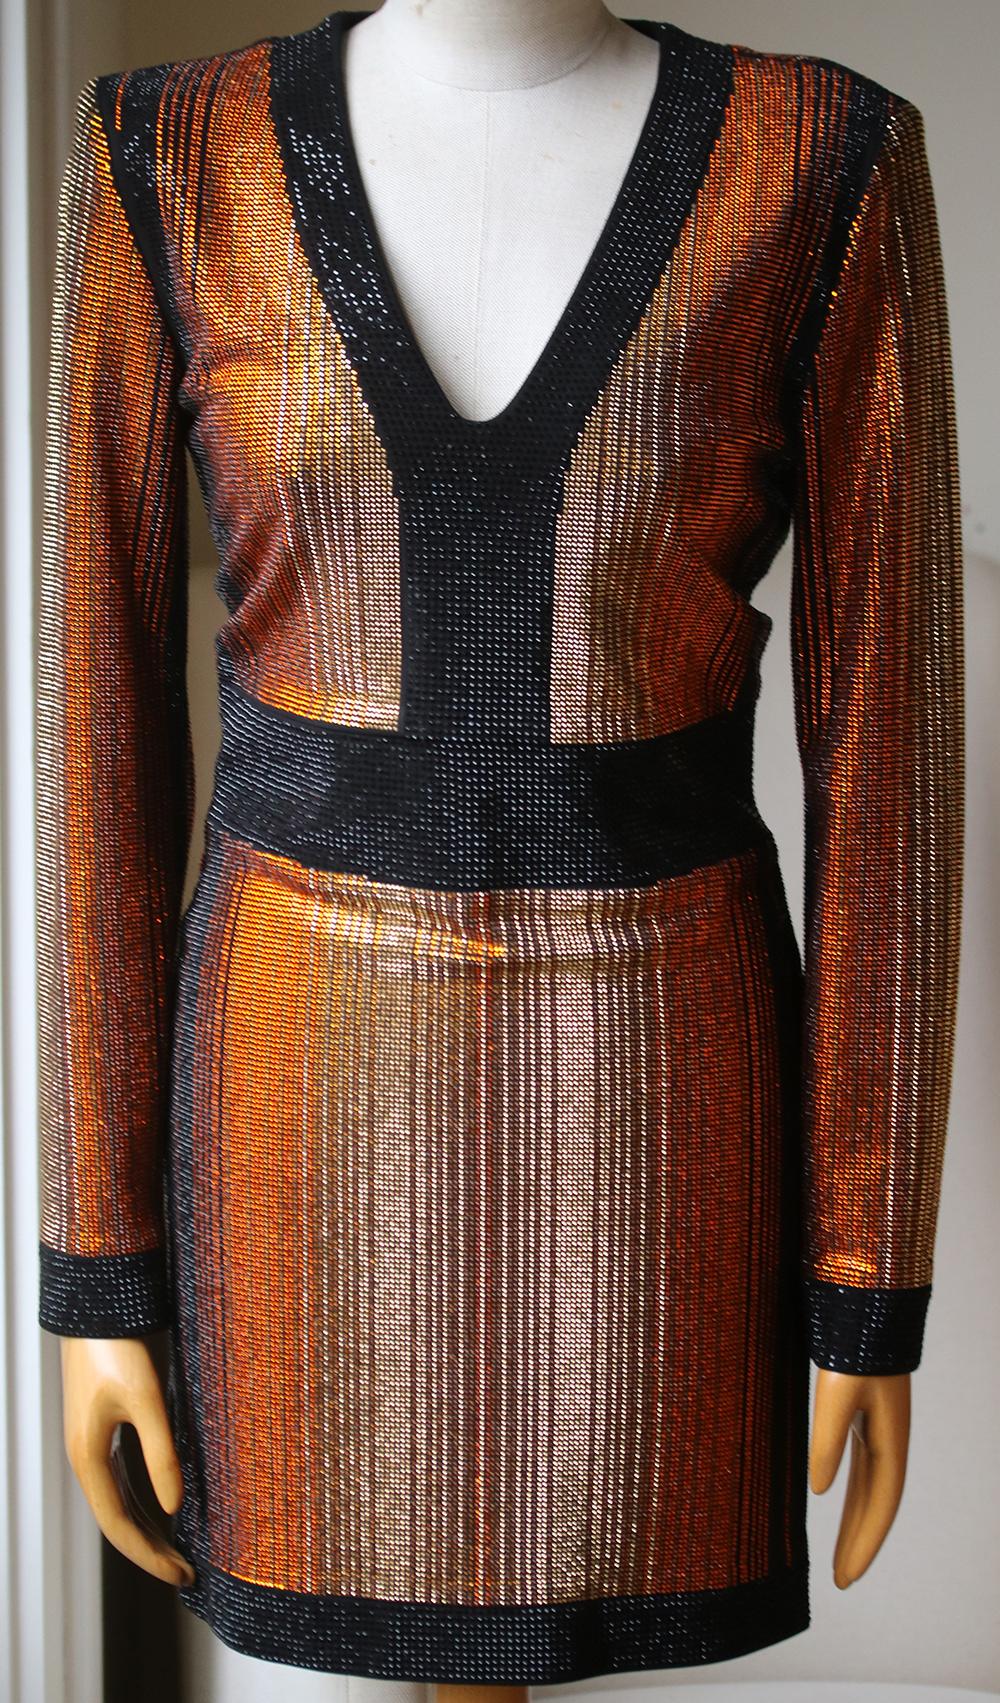 The long sleeves, padded shoulders and bodycon silhouette of this Balmain dress are all signatures of the brand's unique A-list aesthetic. Designed with minimal stretch to smooth and shape the body, the dress is covered in orange, gold and black